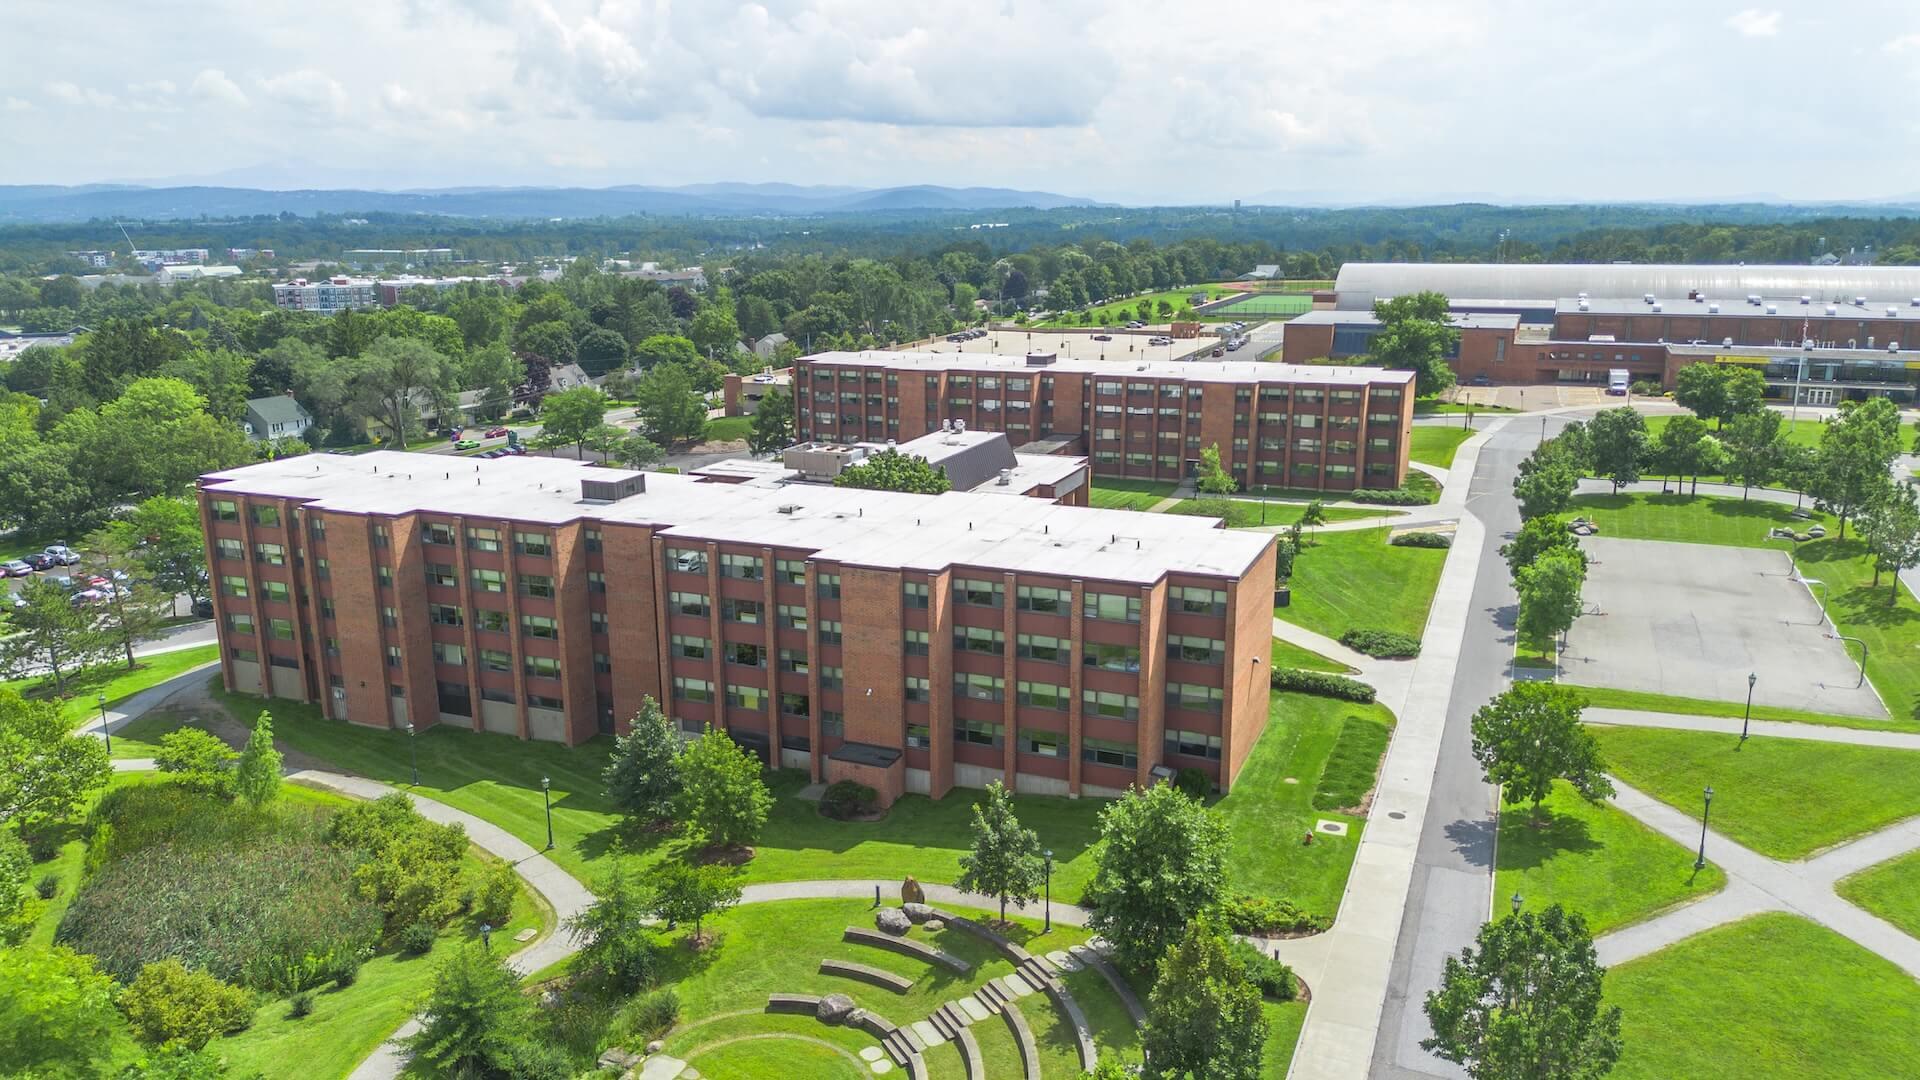 An aerial shot of a two-building residential hall complex surrounded by grassy common areas.